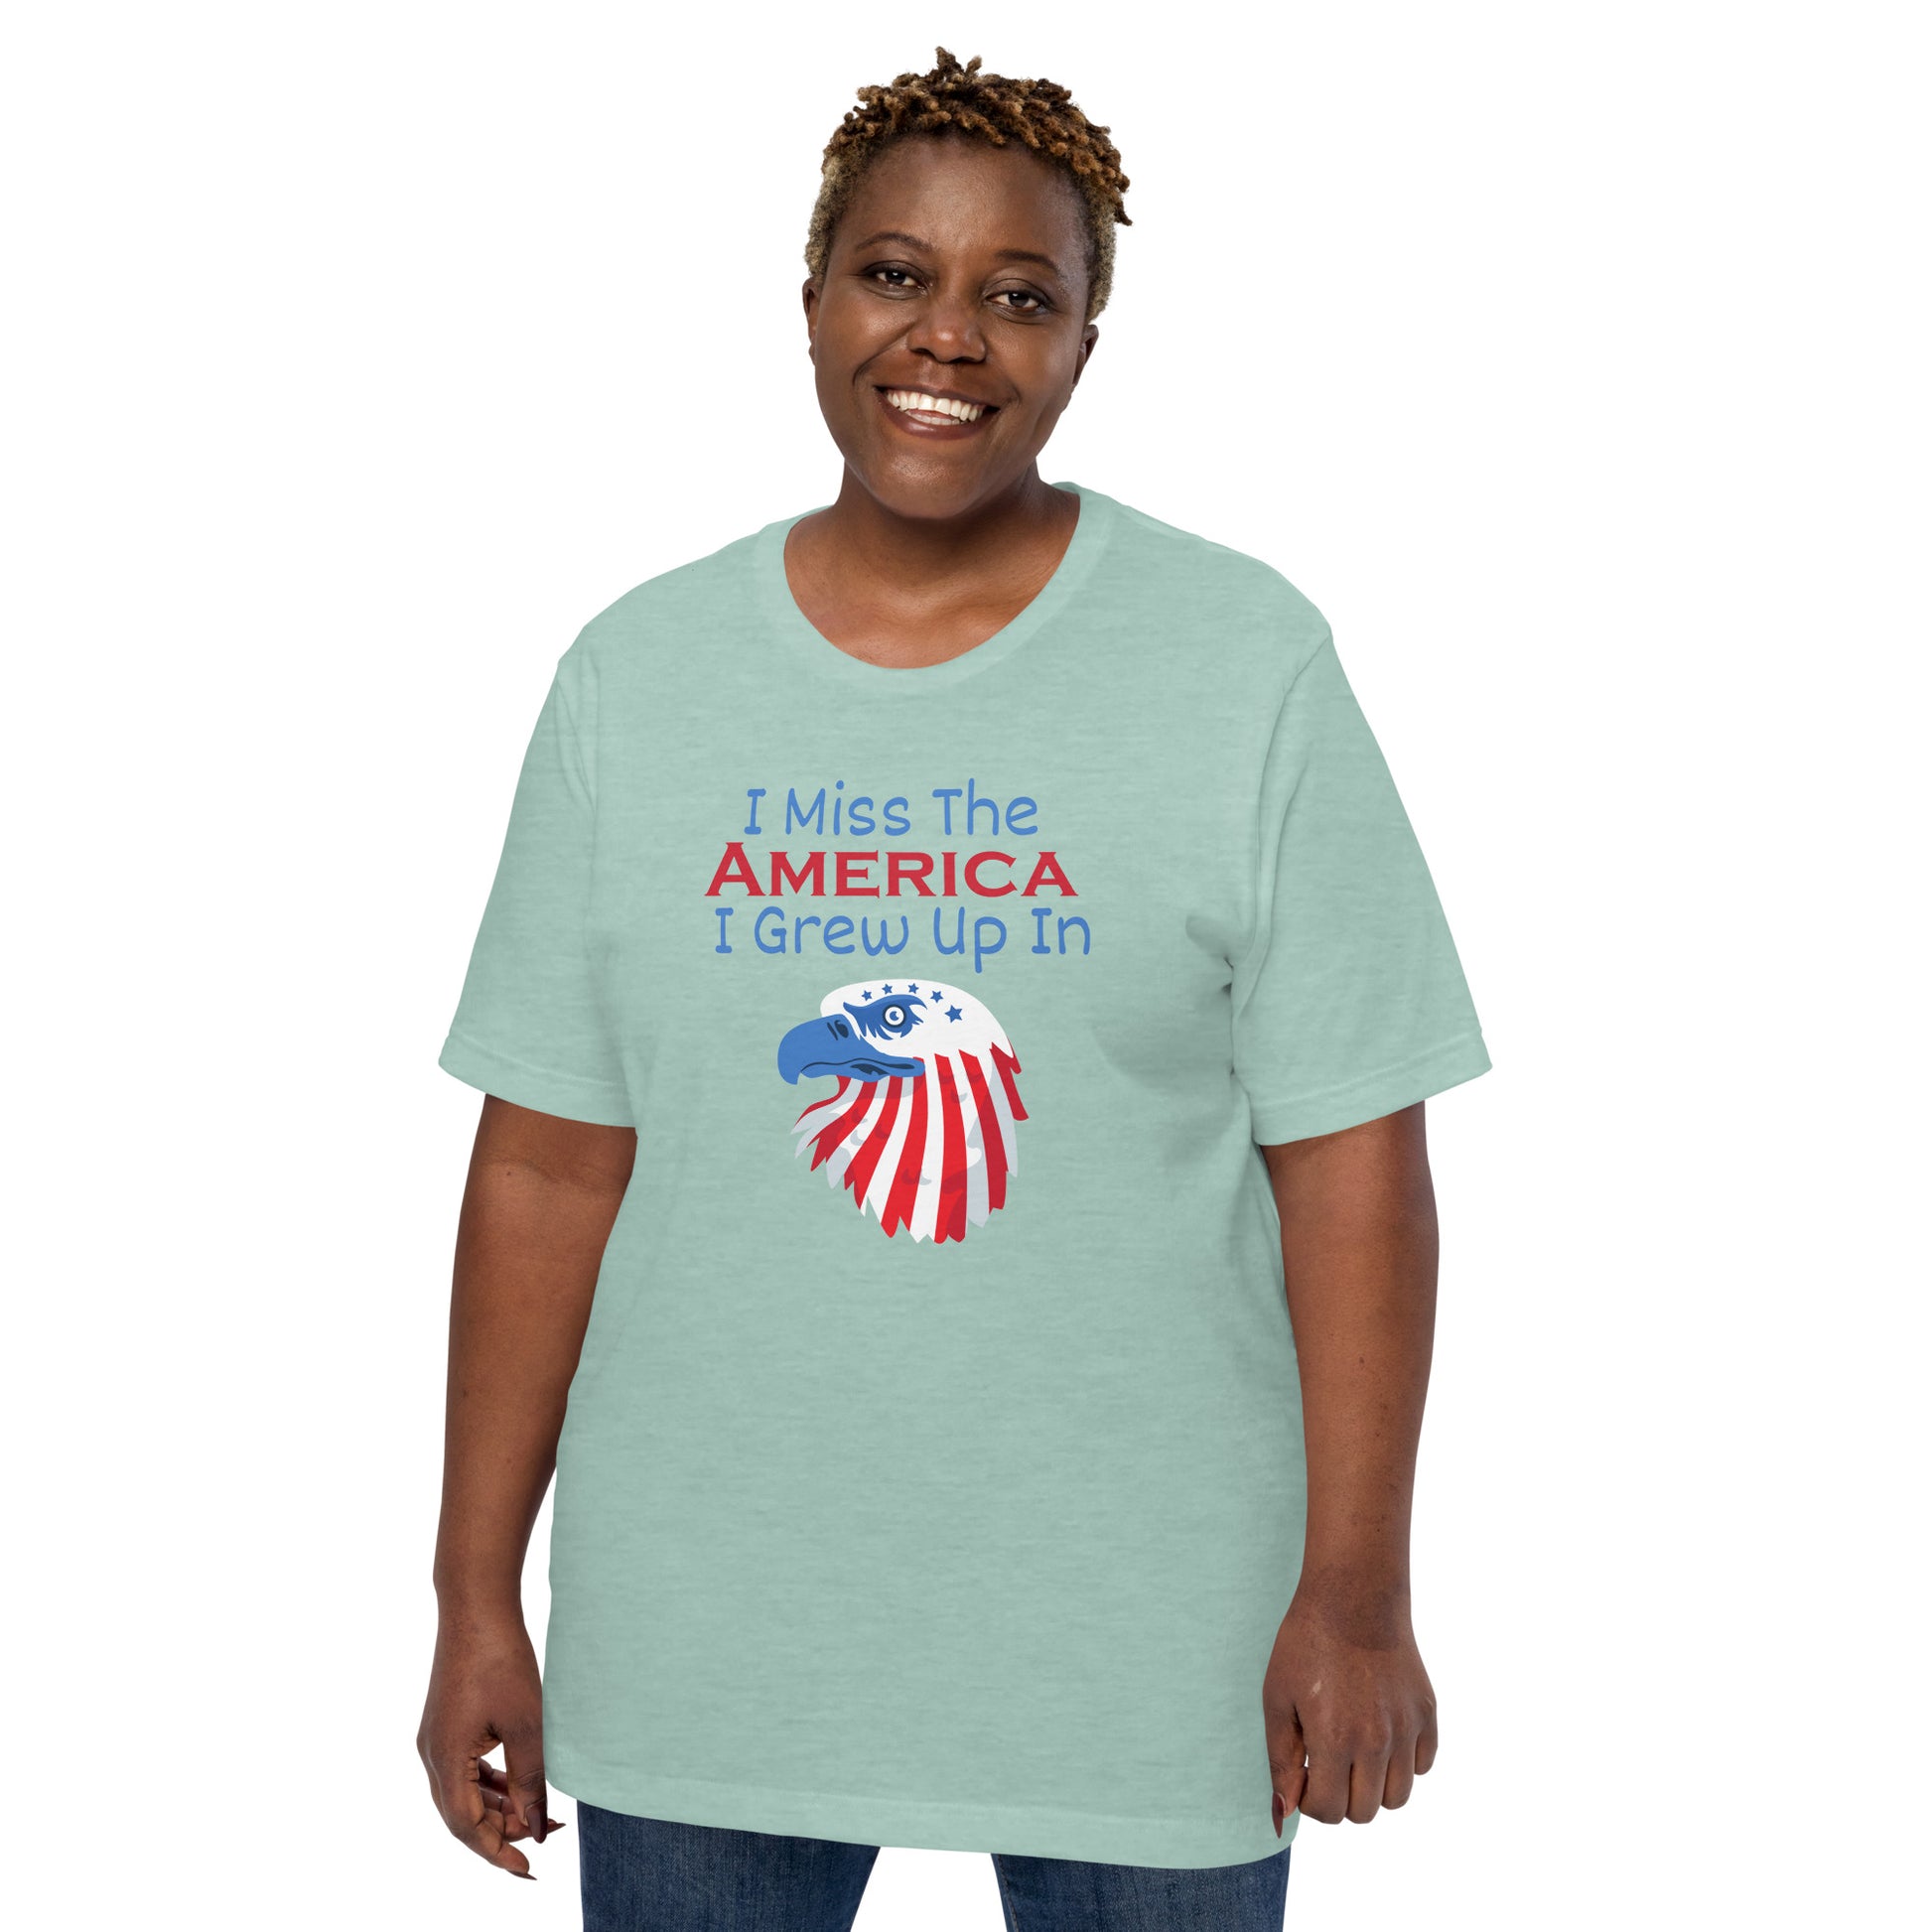 Patriotic t-shirt expressing longing for old America